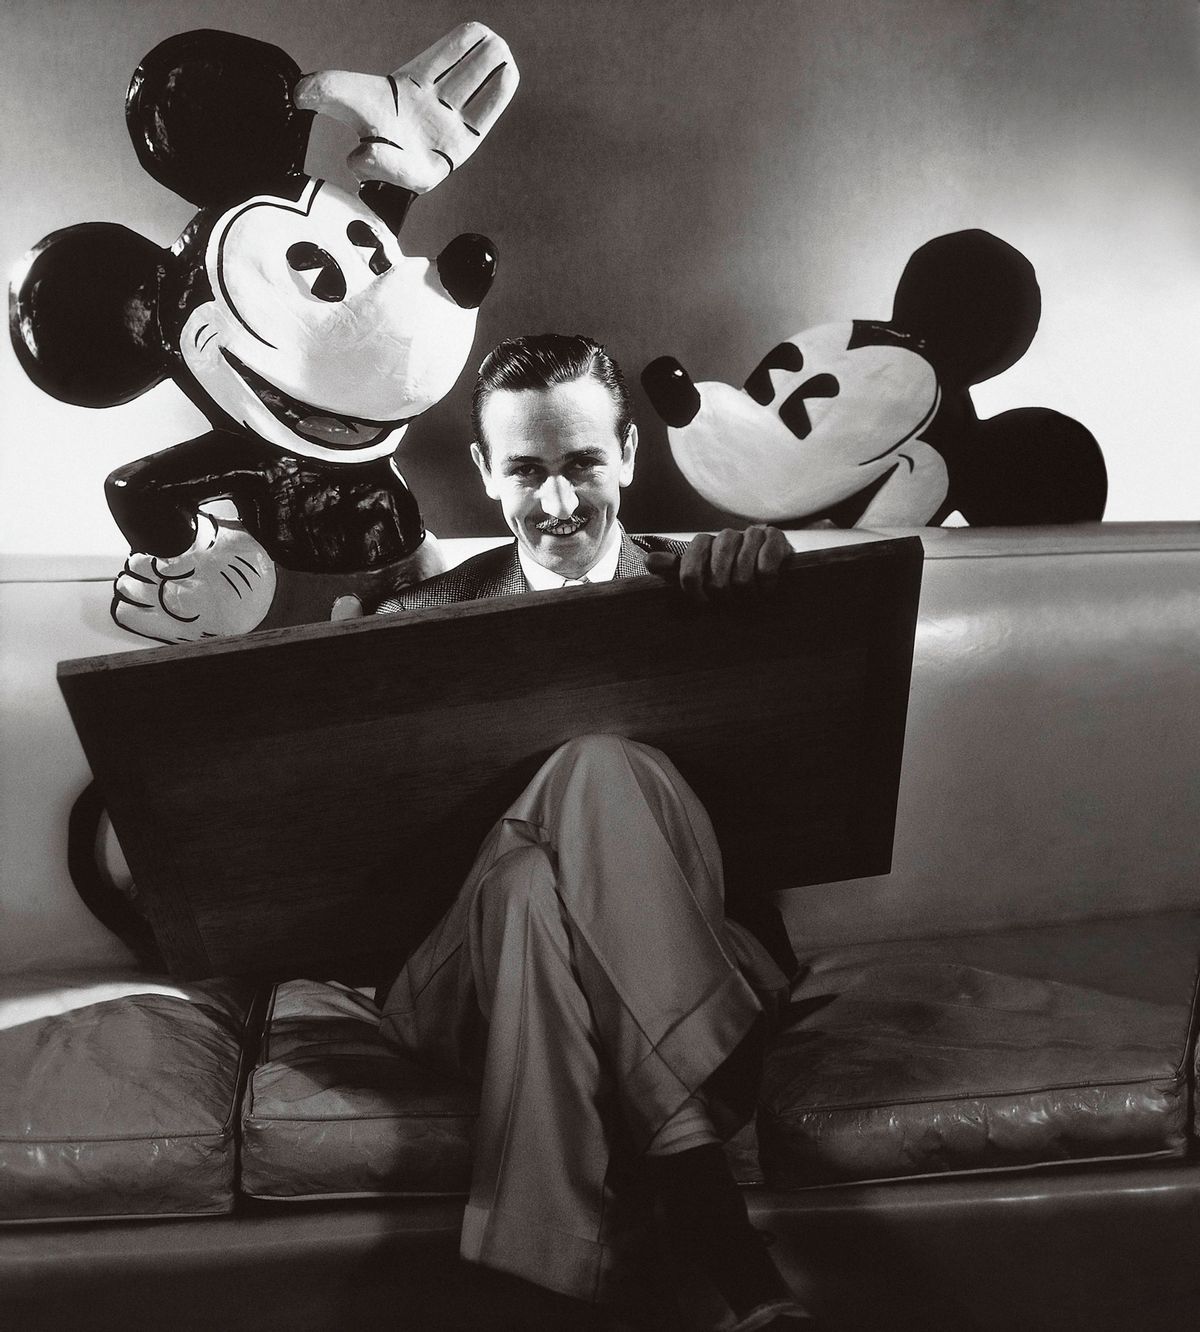 Mickey and Minnie Mouse creator Walt Disney seated with open cartoon folio and representations of his creation Mickey and Minnie behind. (Photo by Edward Steichen/Condé Nast via Getty Images) (Edward Steichen/Condé Nast via Getty Images)